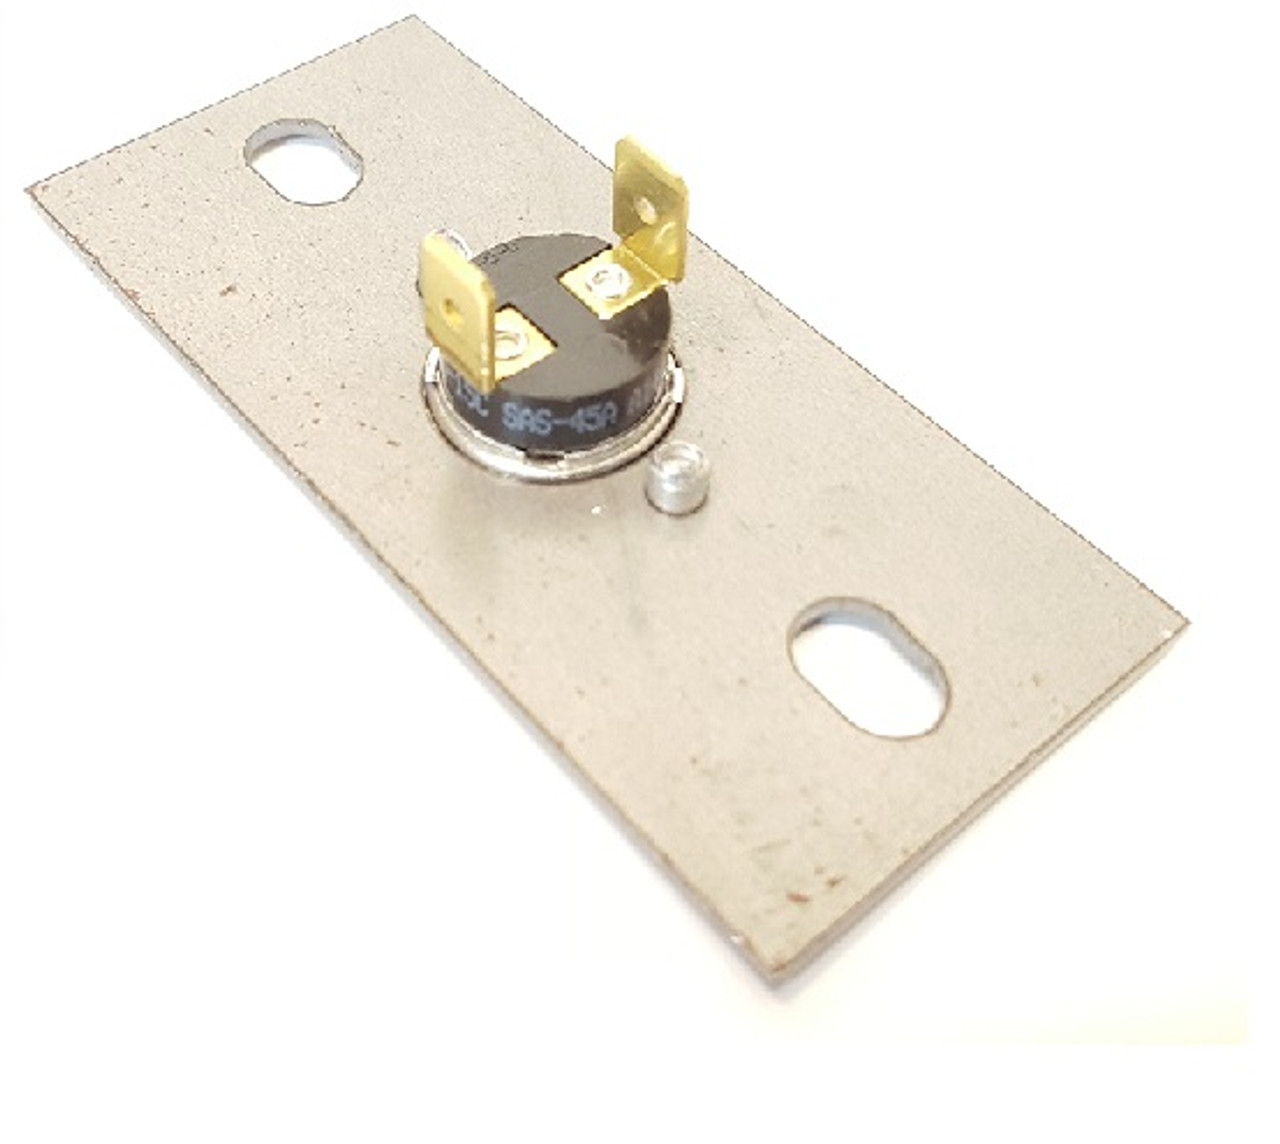 P65-1 Thermal switch assembly for FK24 Kit